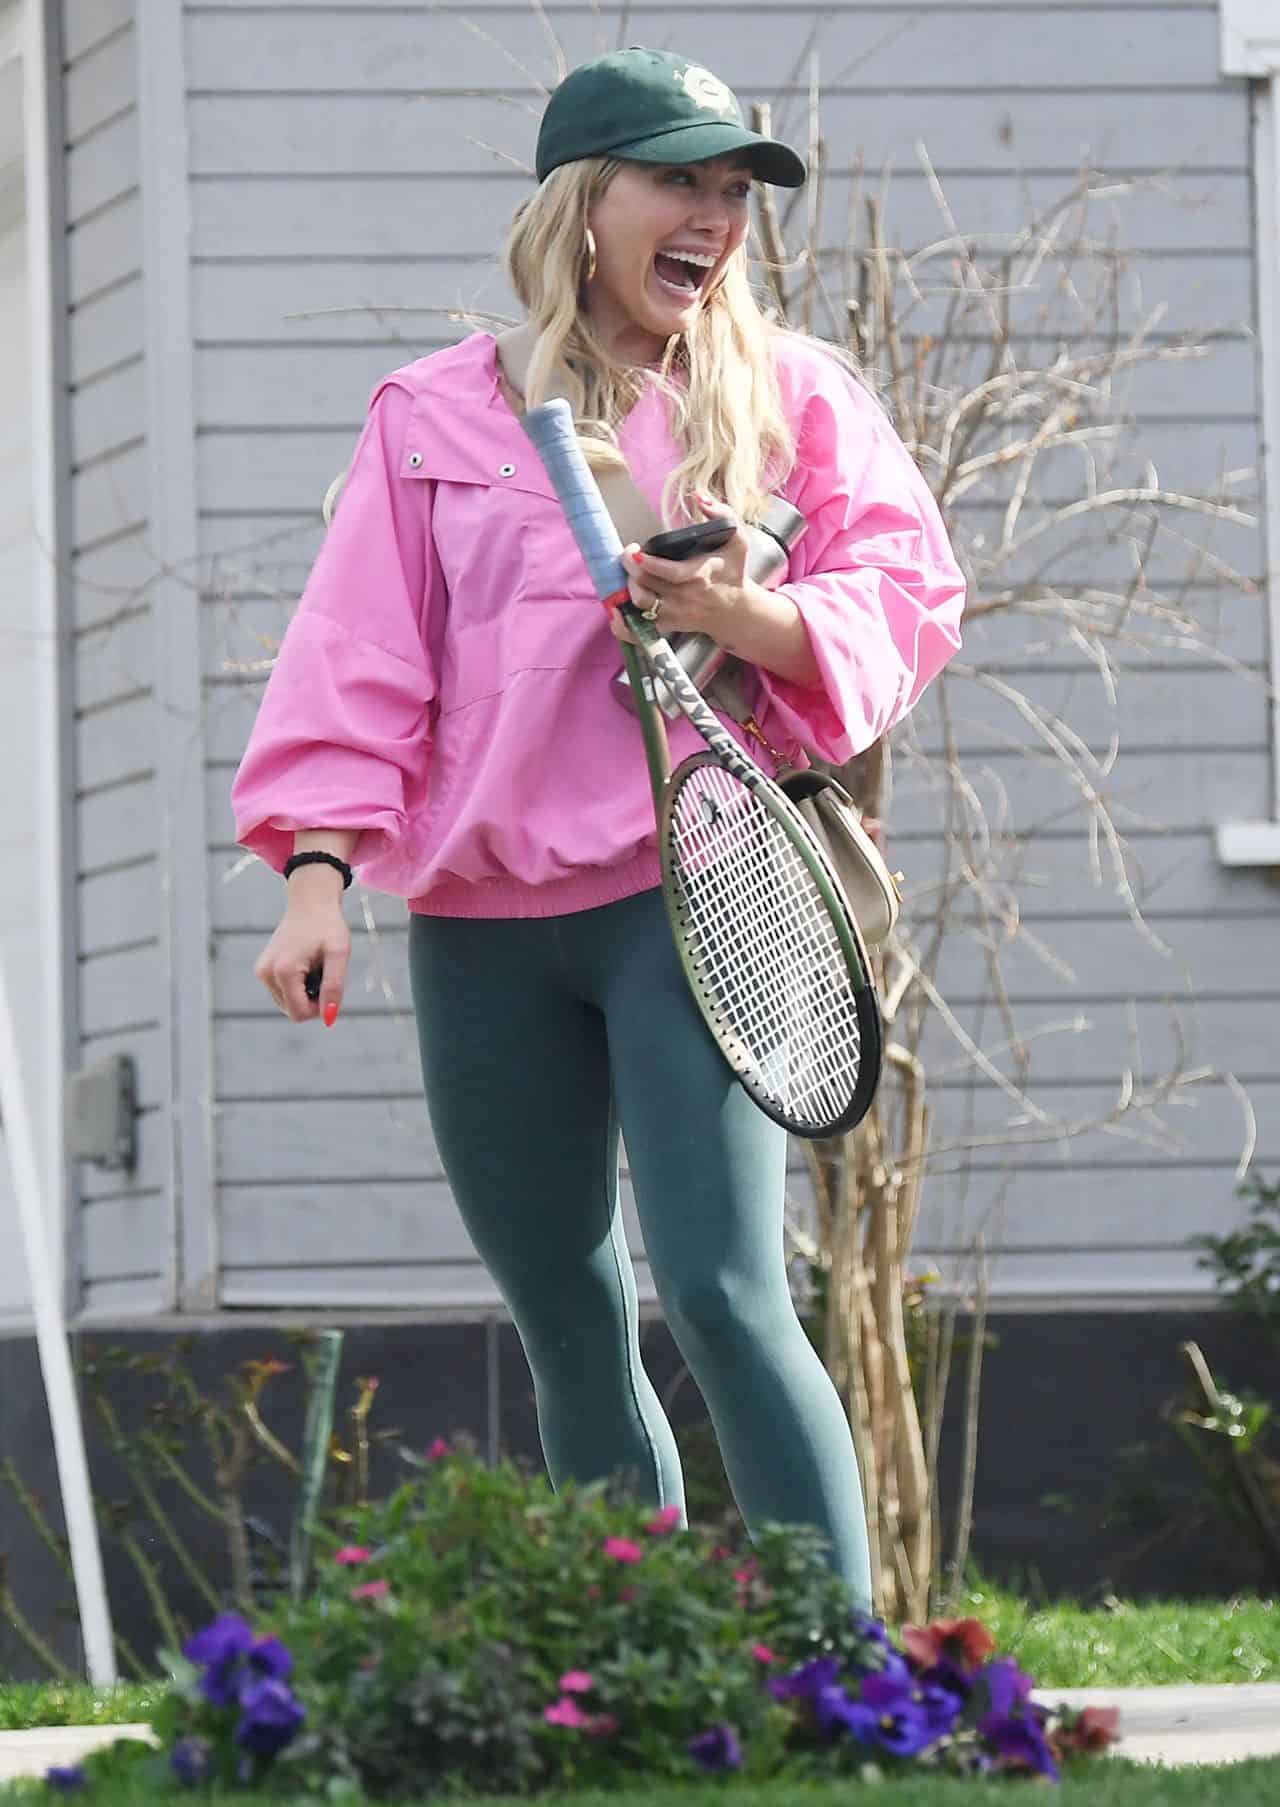 Hilary Duff in Sports Jumpsuit and Pink Windbreaker for Tennis Game